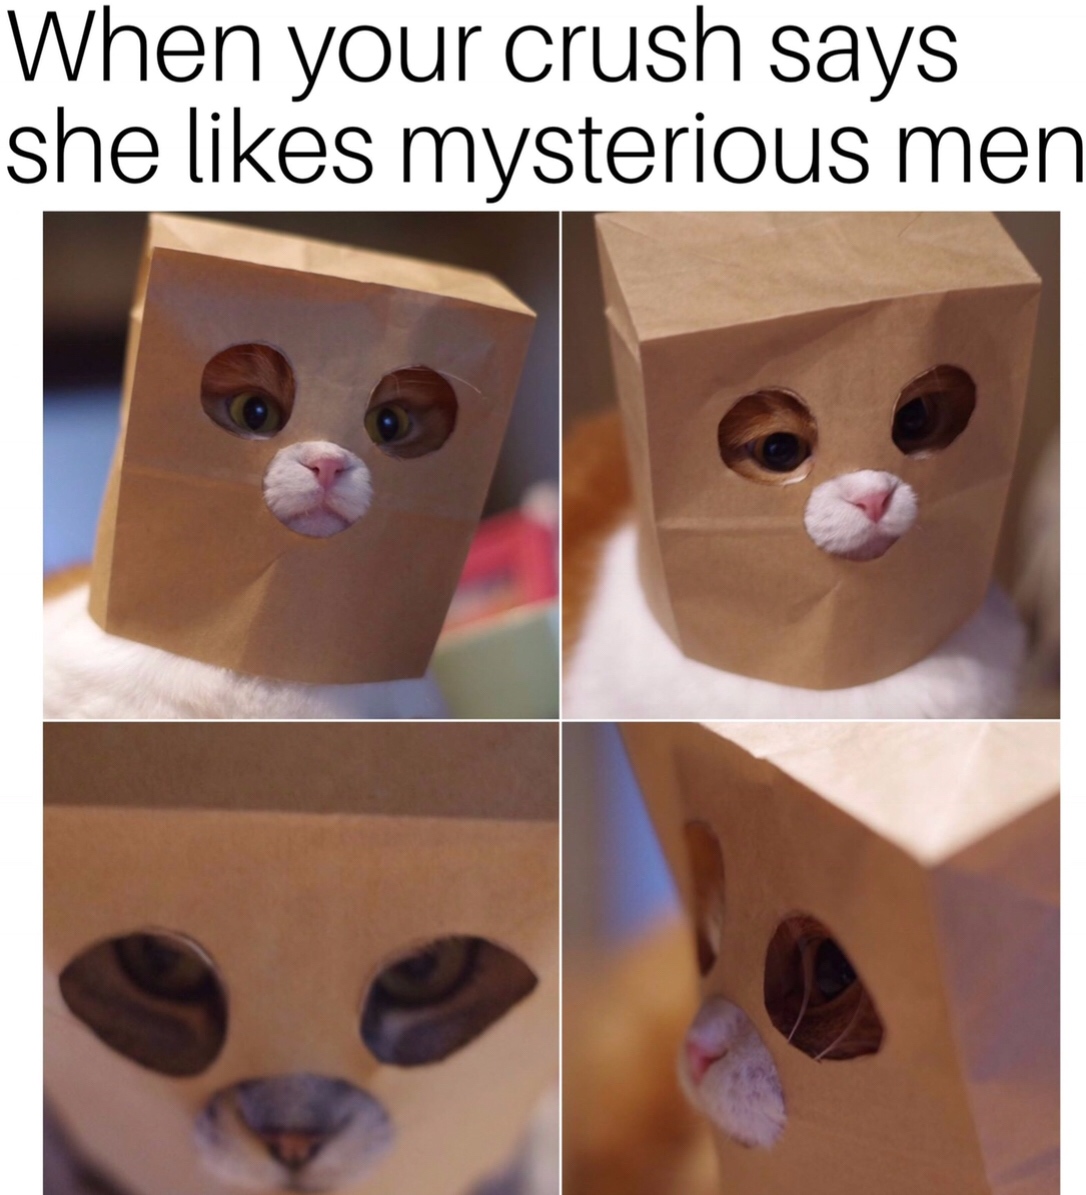 no one cared who i was until - When your crush says she mysterious men